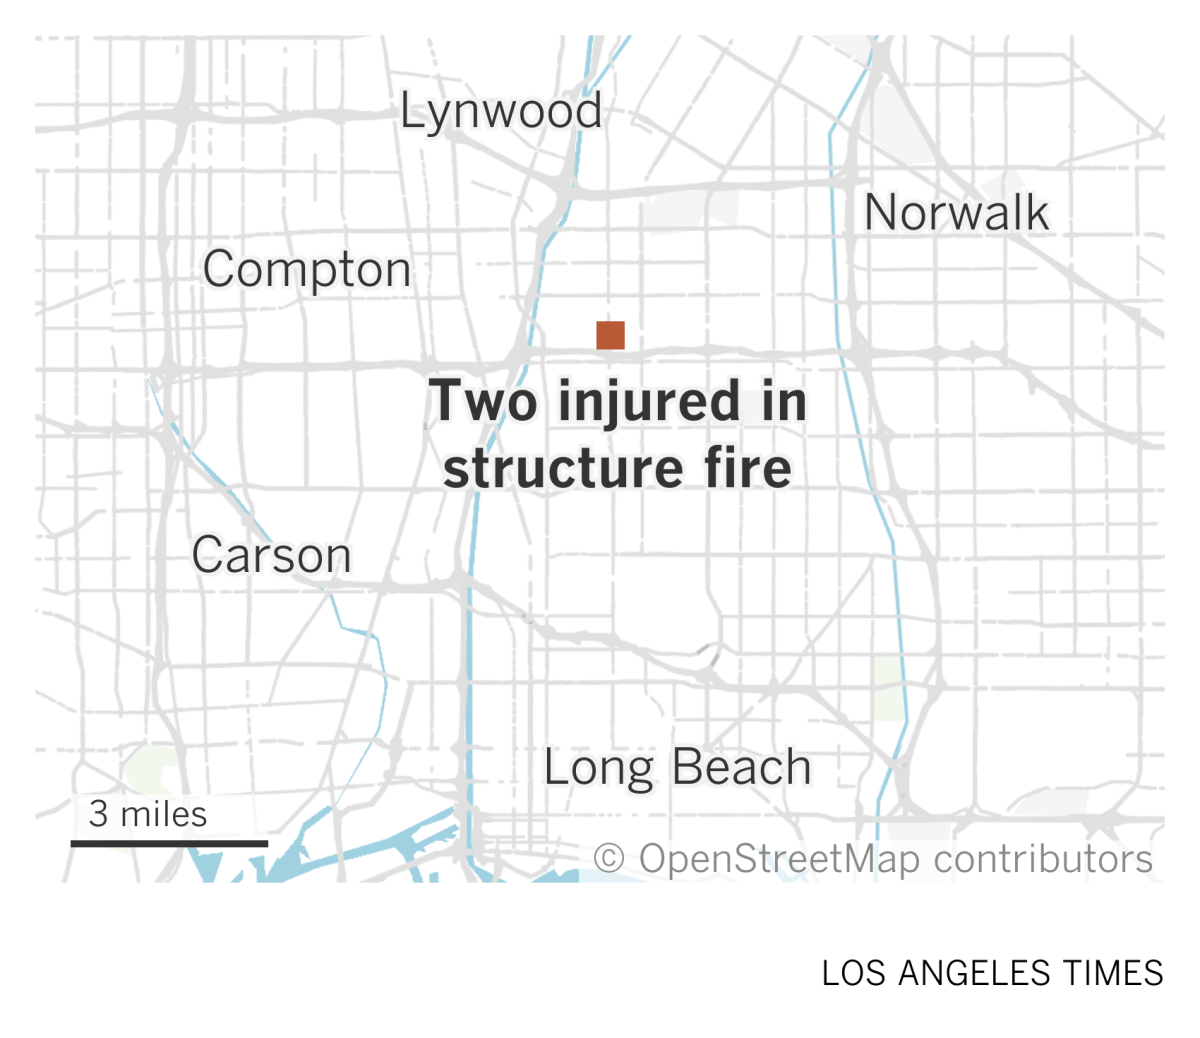 A map of Long Beach and southeast L.A. shows the location of a fire at a commercial building 